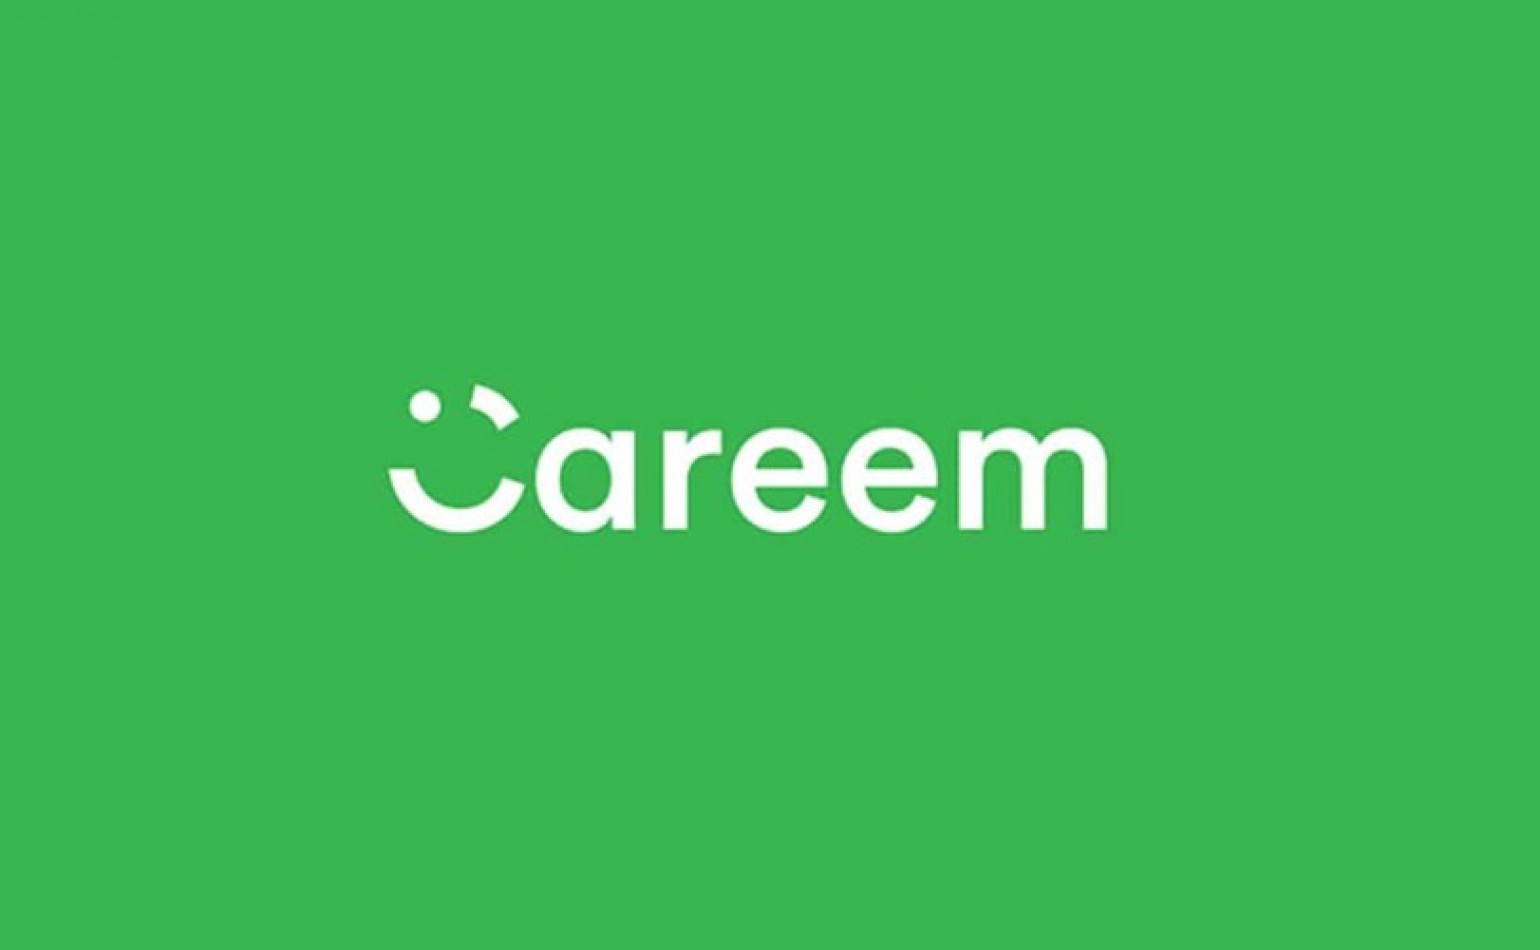 Media Matters for Democracy expresses concern at the recent data breach at Careem; calls for a data protection framework to hold corporations accountable.